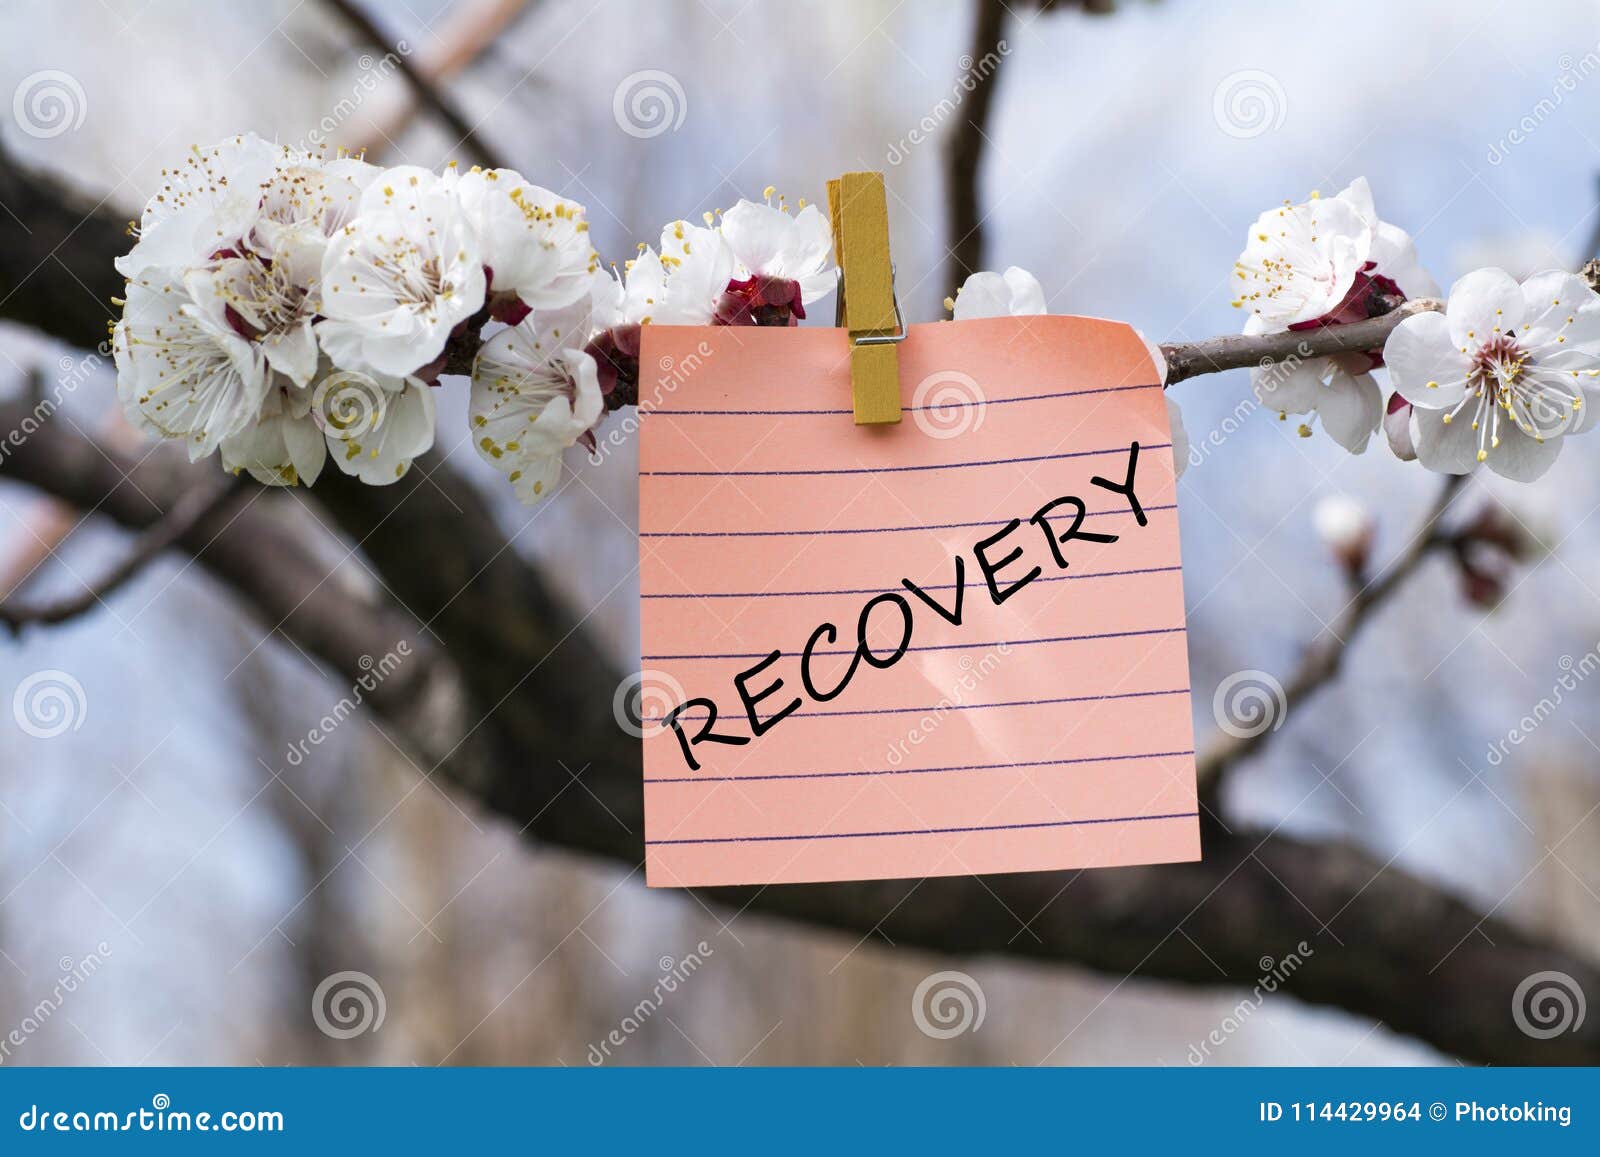 recovery in memo